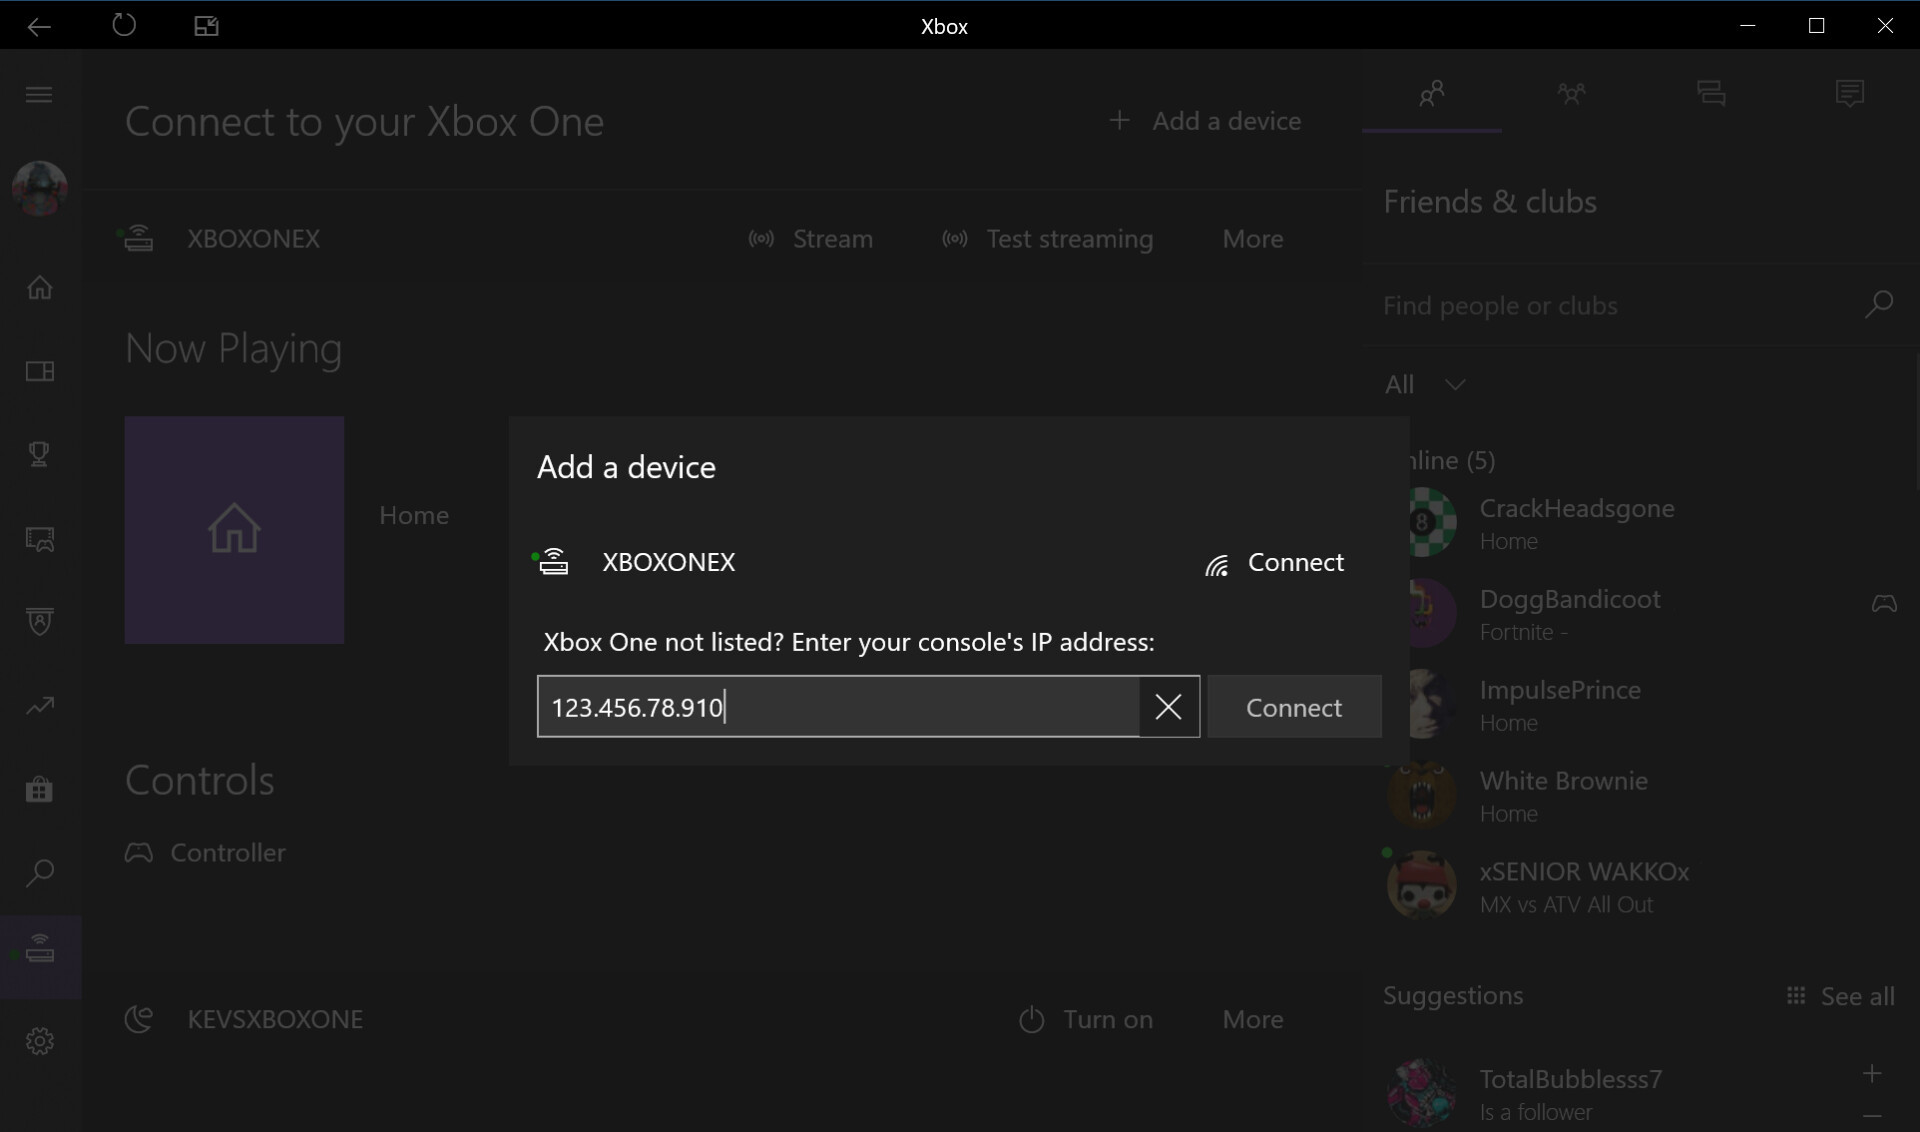 How to stream the Xbox One to Windows 10